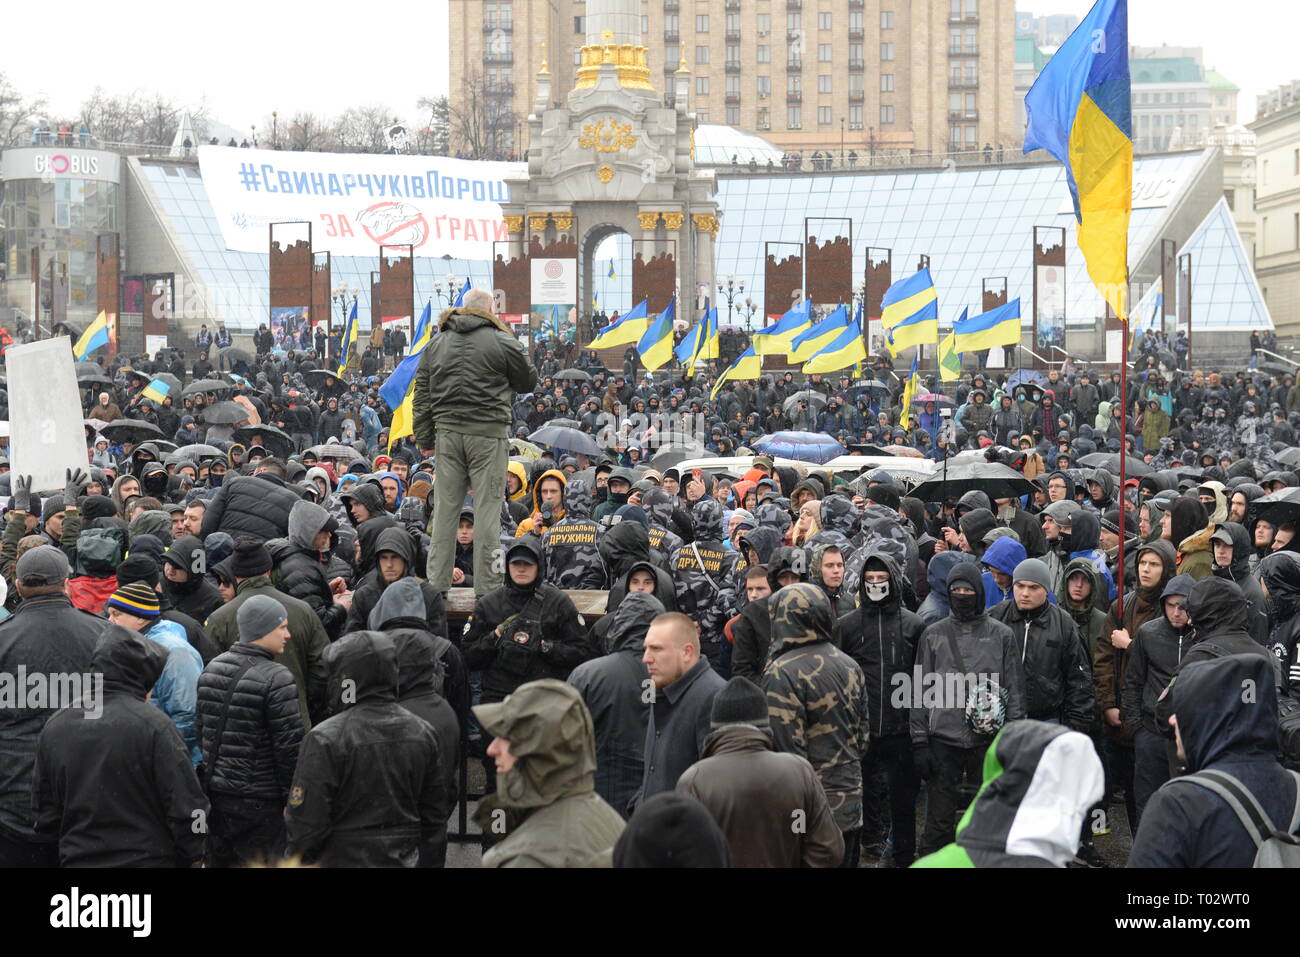 Kiev, Ukraine. 16th March 2019. Right wing nationalists protest Ukrainian president Poroshenko in Kiev, Ukraine.  Upwards of 2-3,000 nationalists marched from Independence Square to the presidential administration building and hurled stuffed pigs at police and national guard.  National Corps party member and Member of Parliament Andrei Biletsky spoke to his supporters of mostly young males dressed in uniforms and various neo Nazi symbols. Credit: Mario Montoya/Alamy Live News Stock Photo